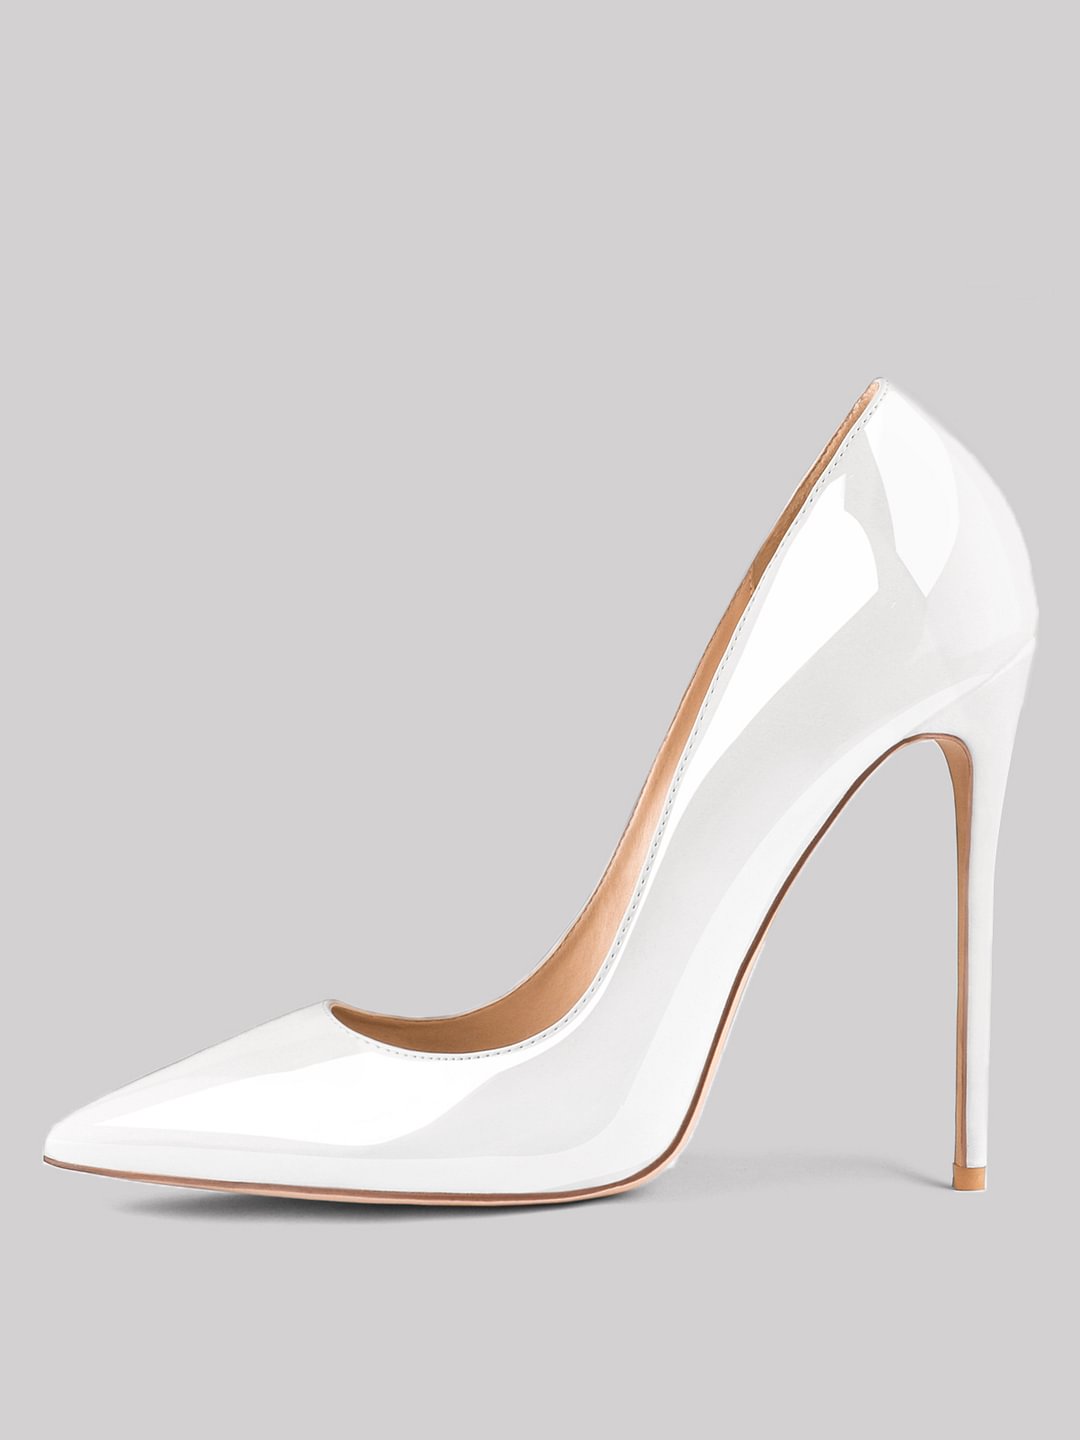 120mm Women's Pointy Toe Party Wedding Pumps Matte/Patent High Heels Shoes